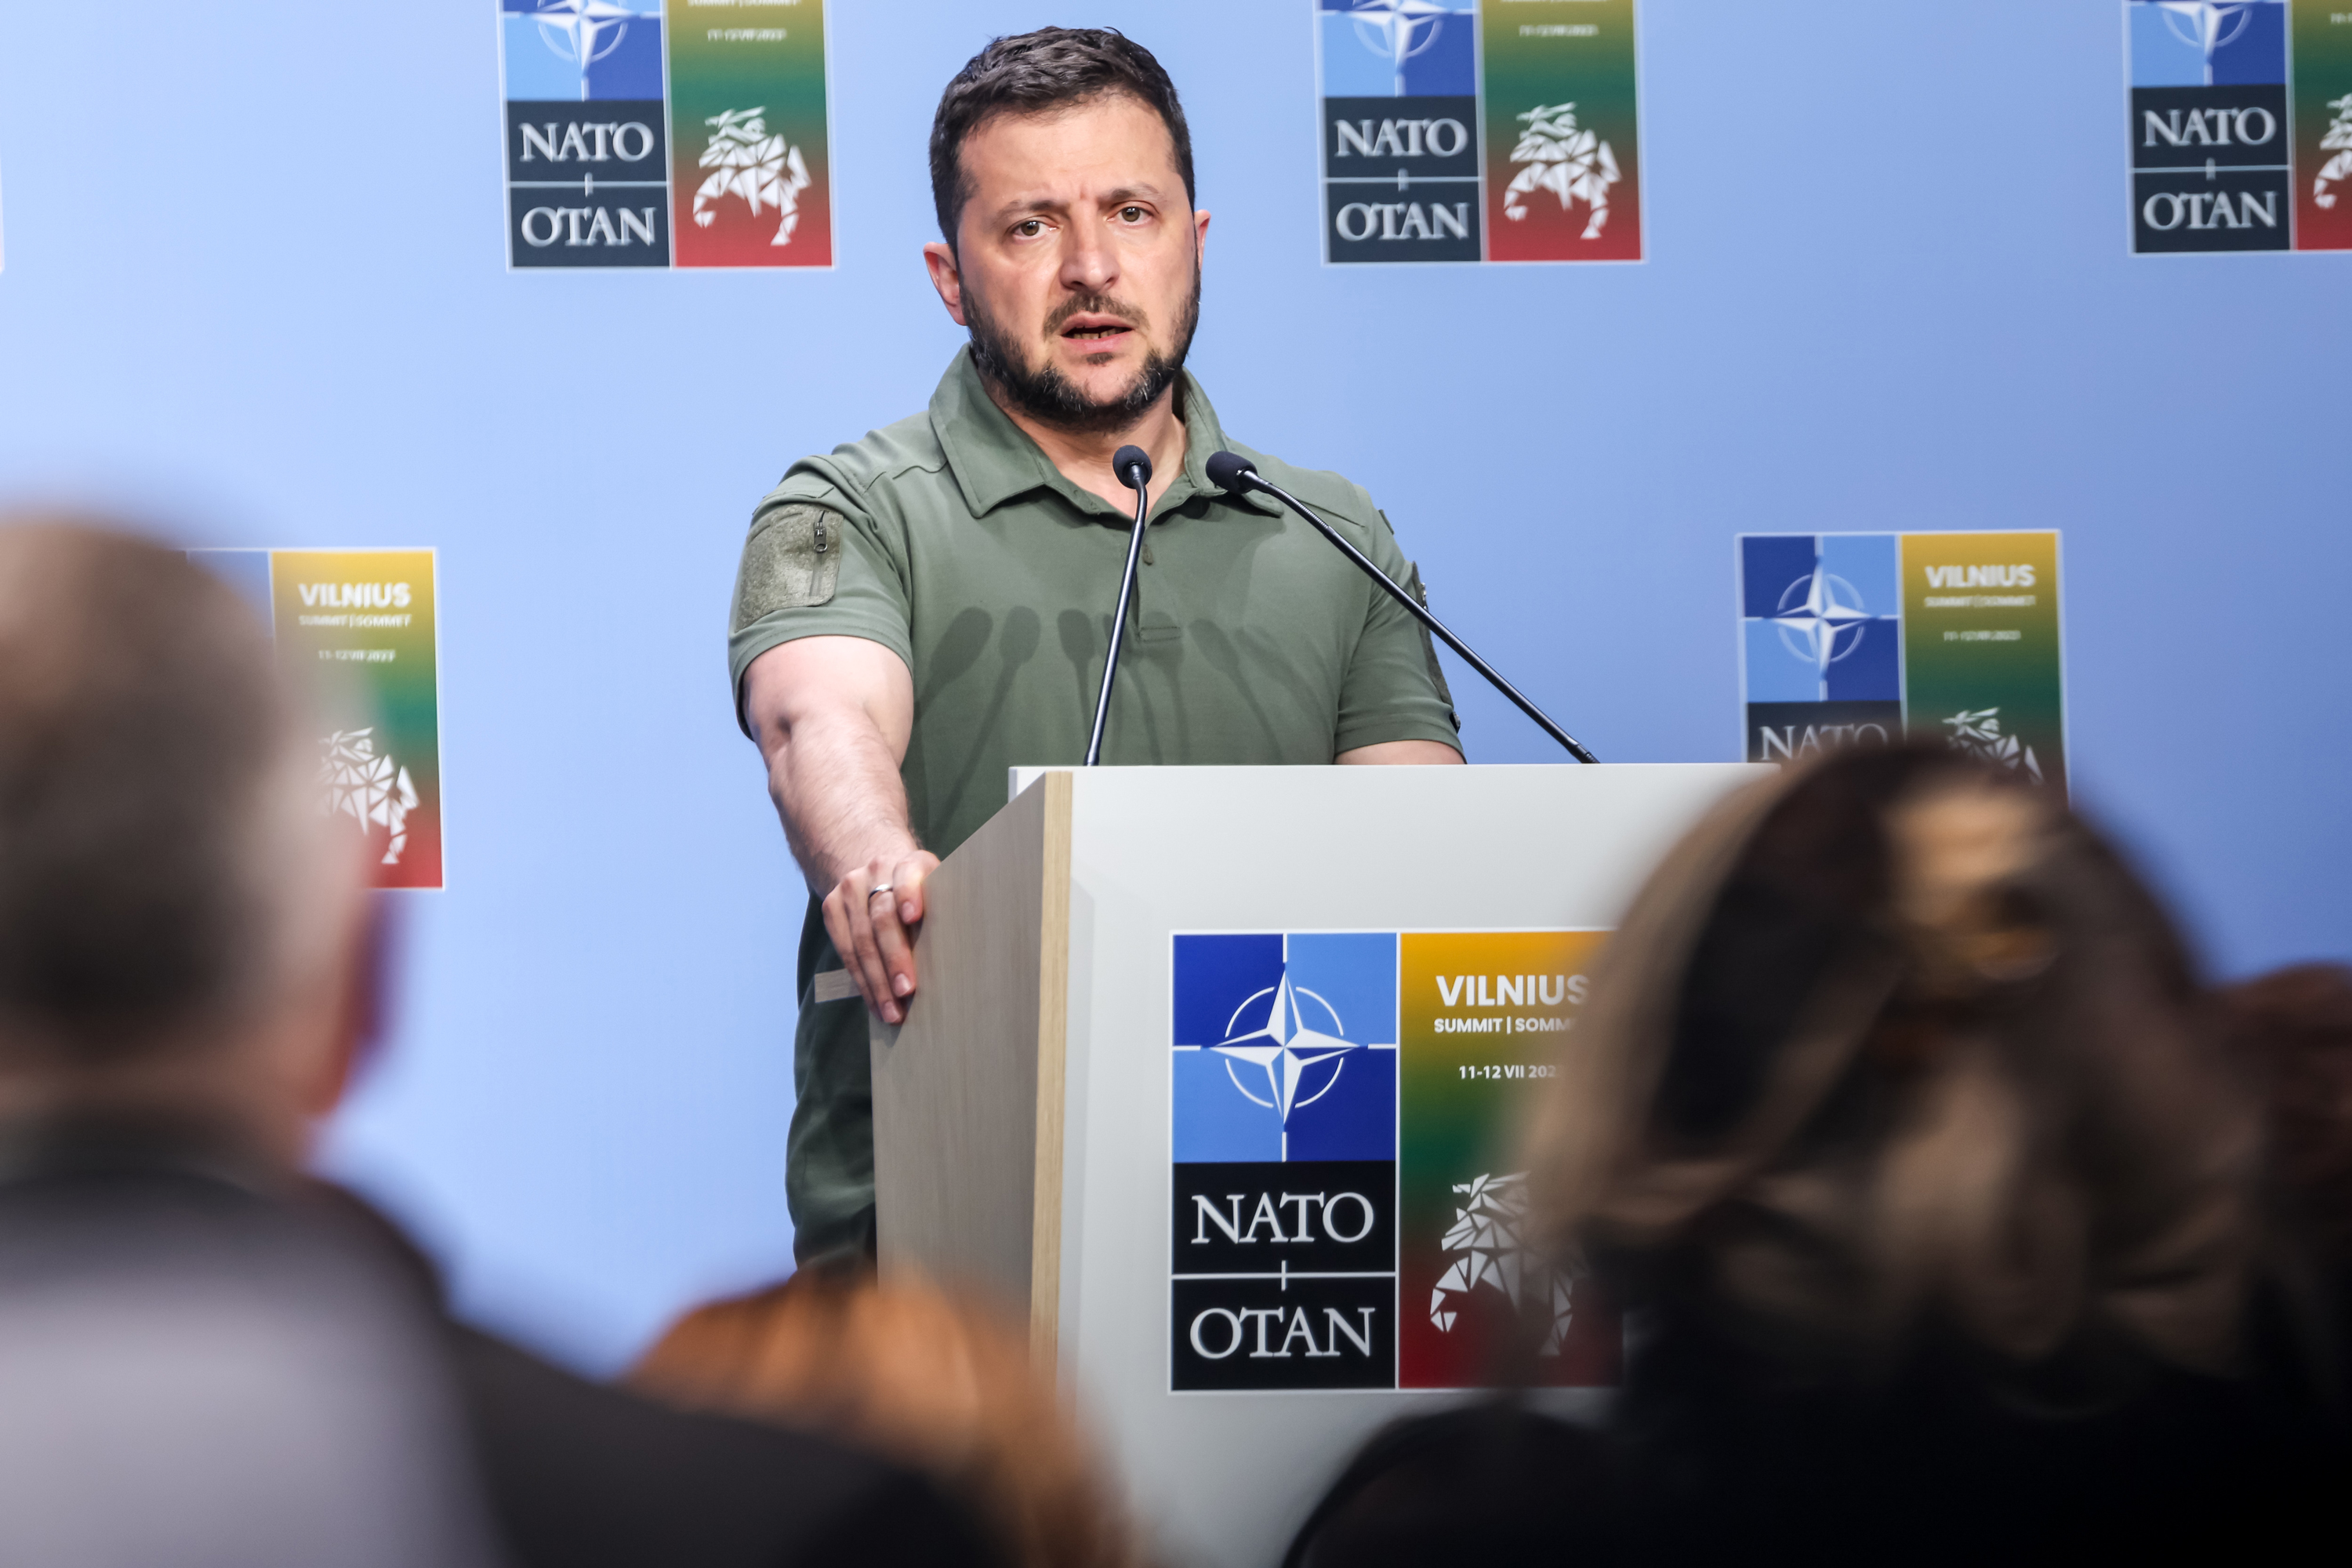 Volodymyr Zelensky addresses journalists during the final national press conference during the high level NATO summit in Vilnius, Lithuania on Tuesday.